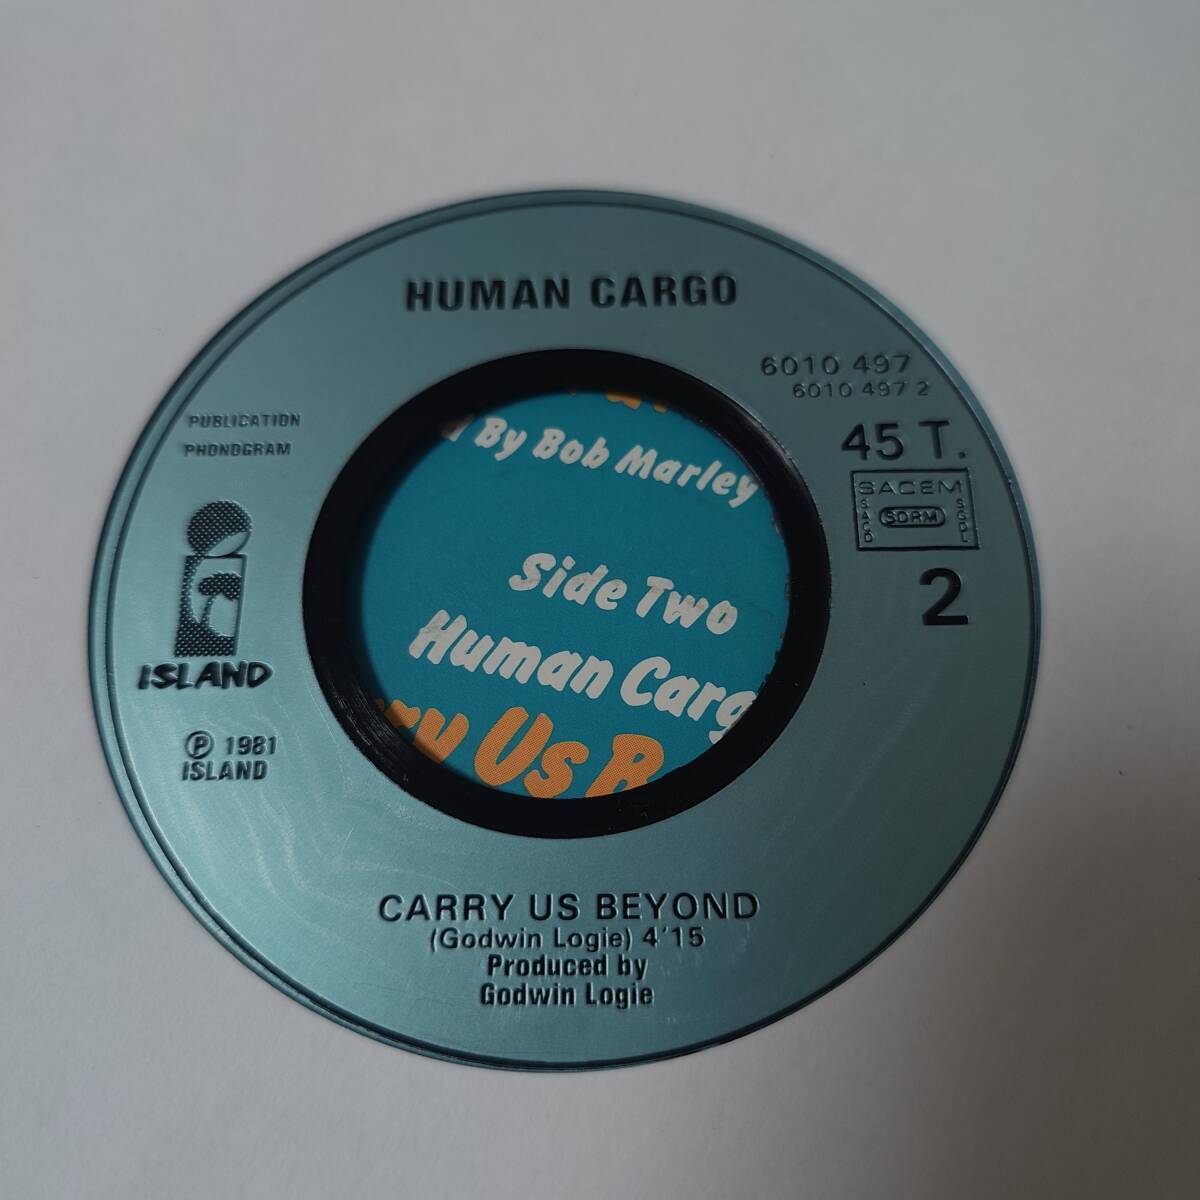 Bob Marley & The Wailers - Natural Mystic / Human Cargo - Carry Us Beyond // Island Records 7inch / Roots_画像4